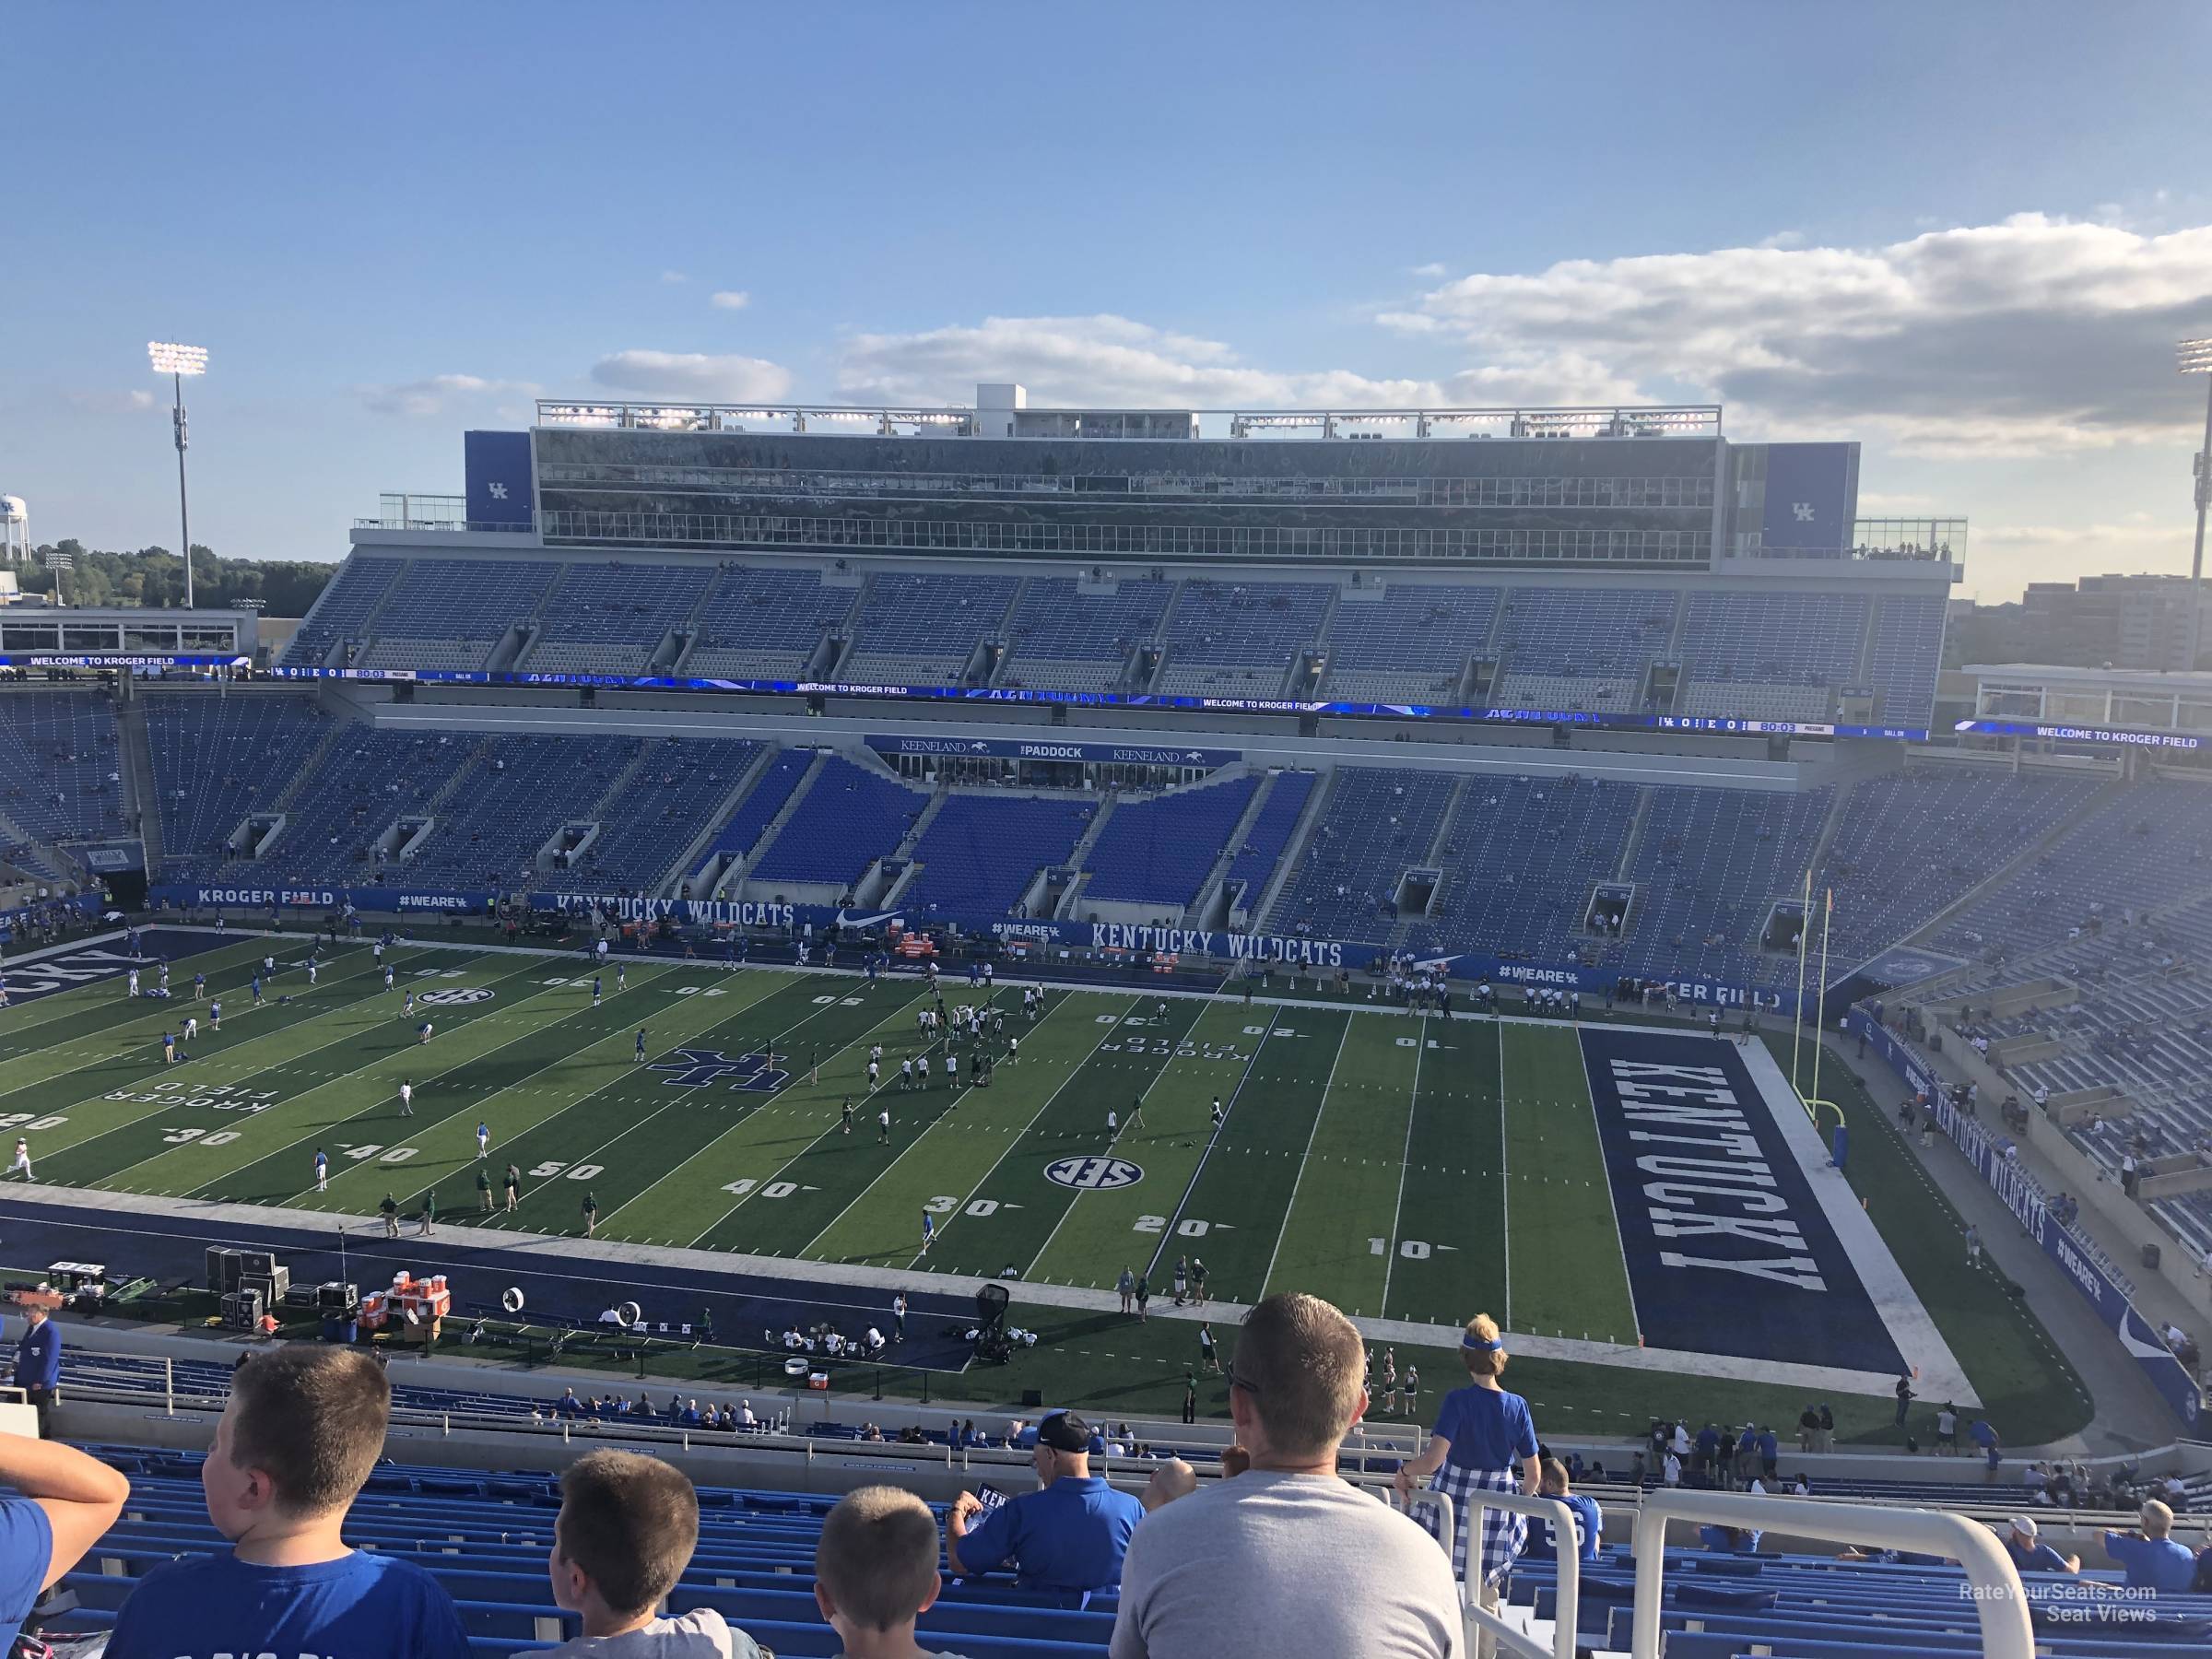 section 208, row 25 seat view  - kroger field